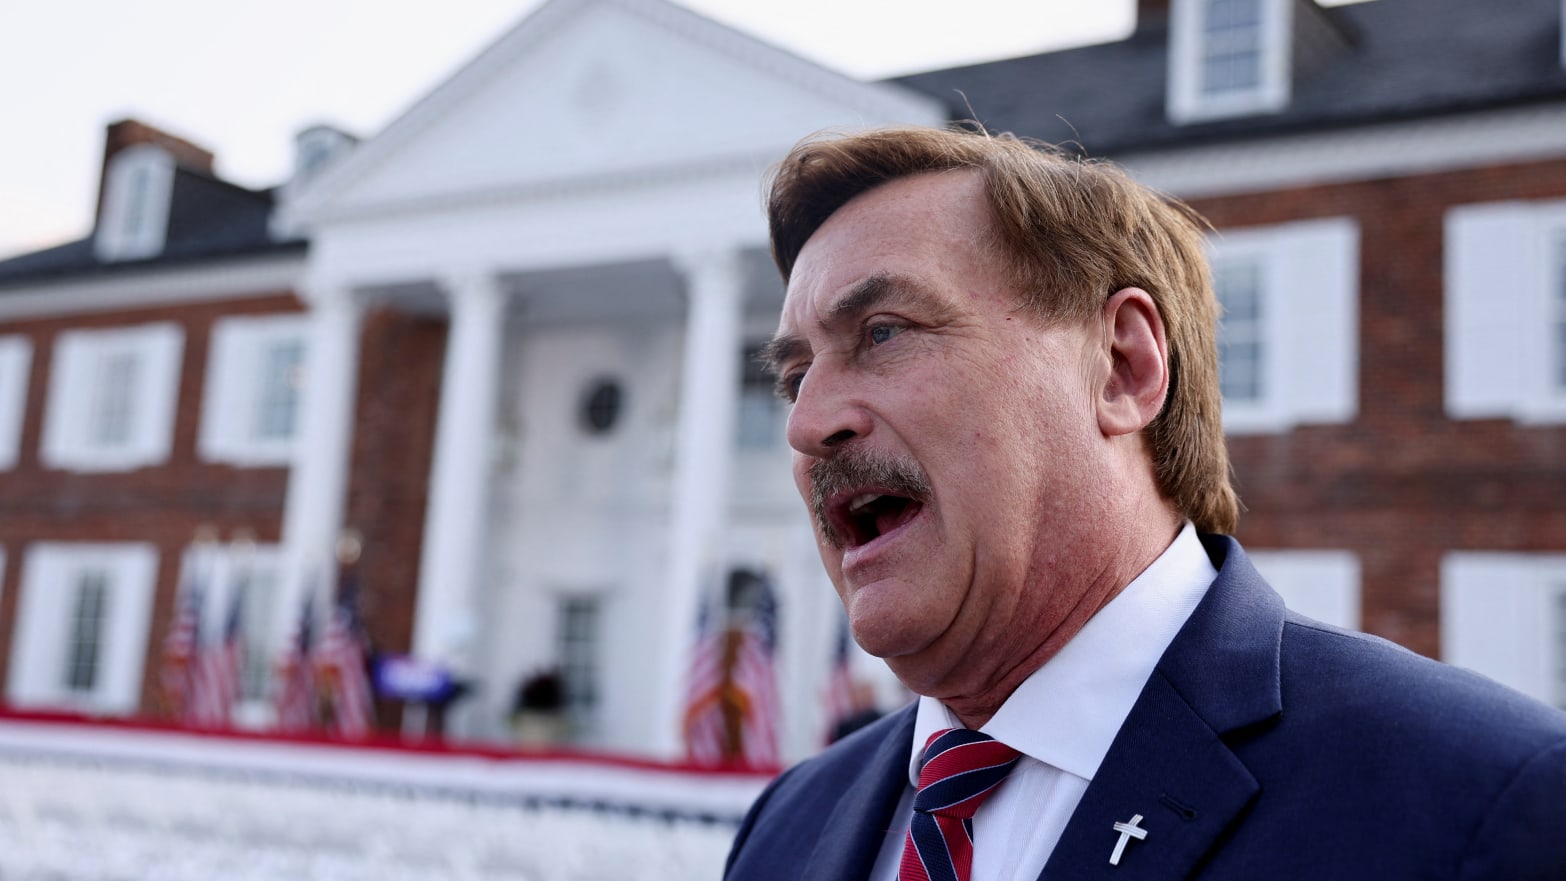 My Pillow CEO Mike Lindell speaks as he waits for former U.S. President Donald Trump, following Trump's arraignment on classified document charges, at Trump National Golf Club, in Bedminster, New Jersey, U.S., June 13, 2023.